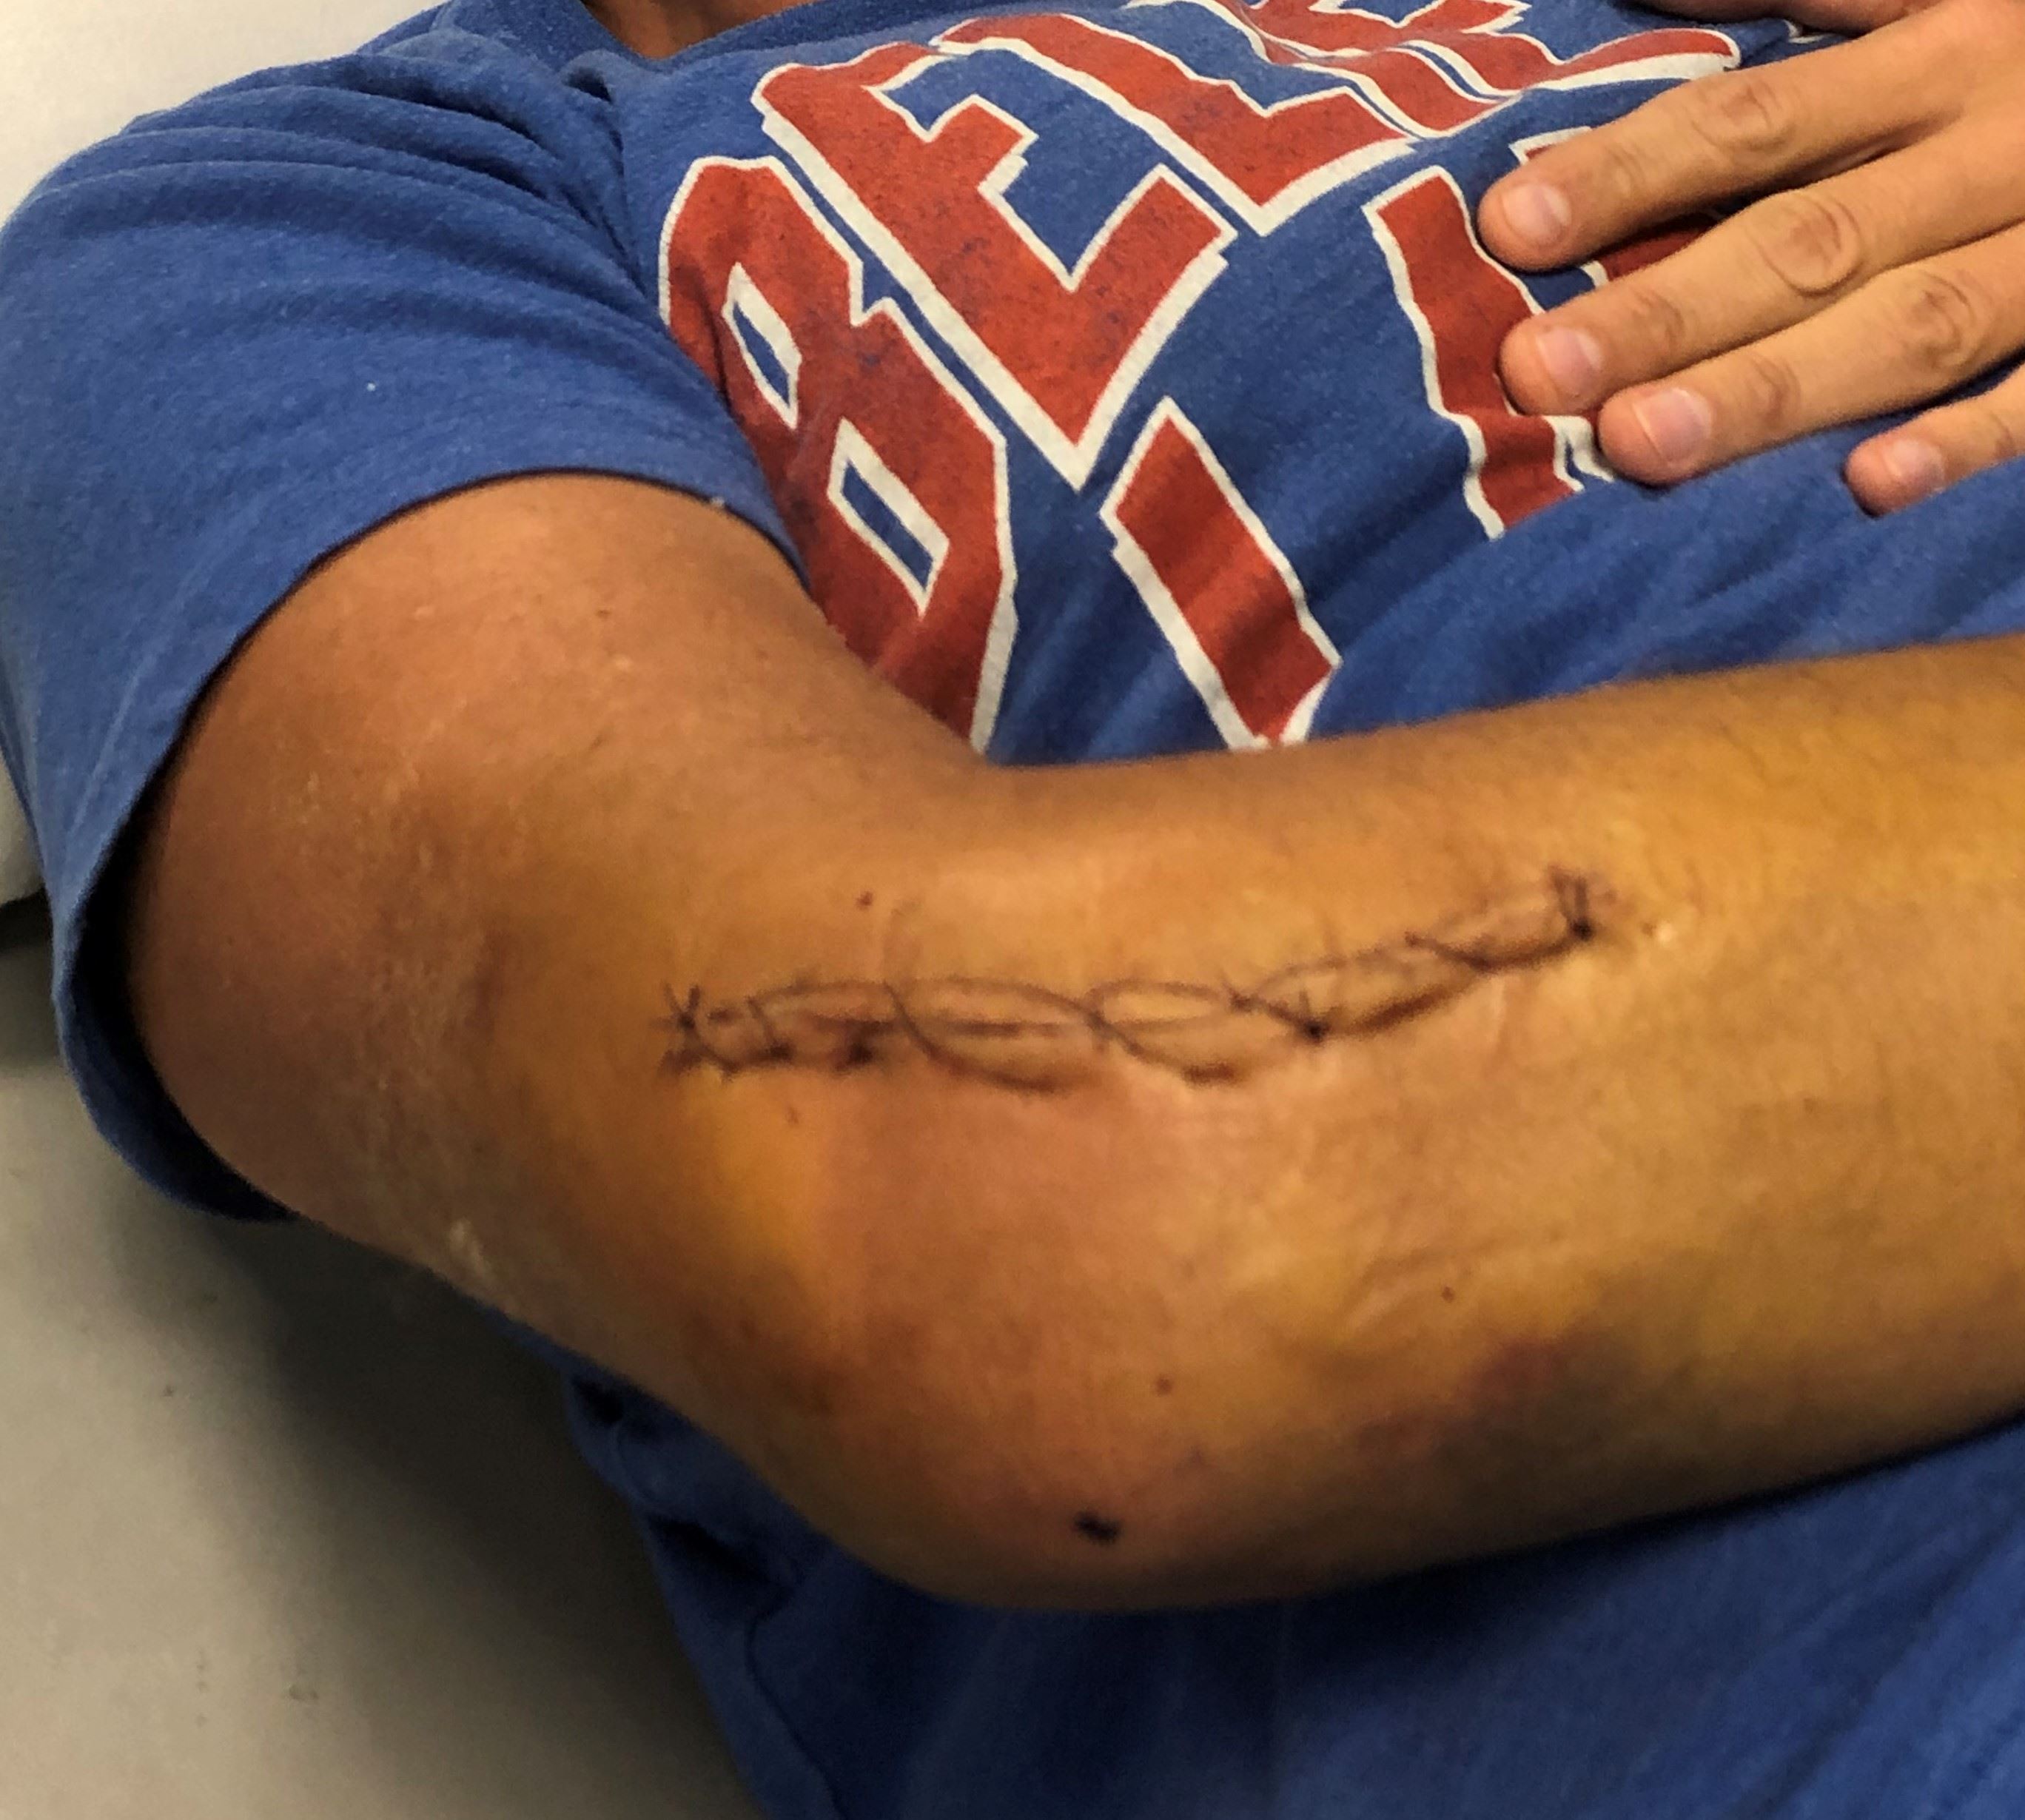 Right elbow of injured person with stitches